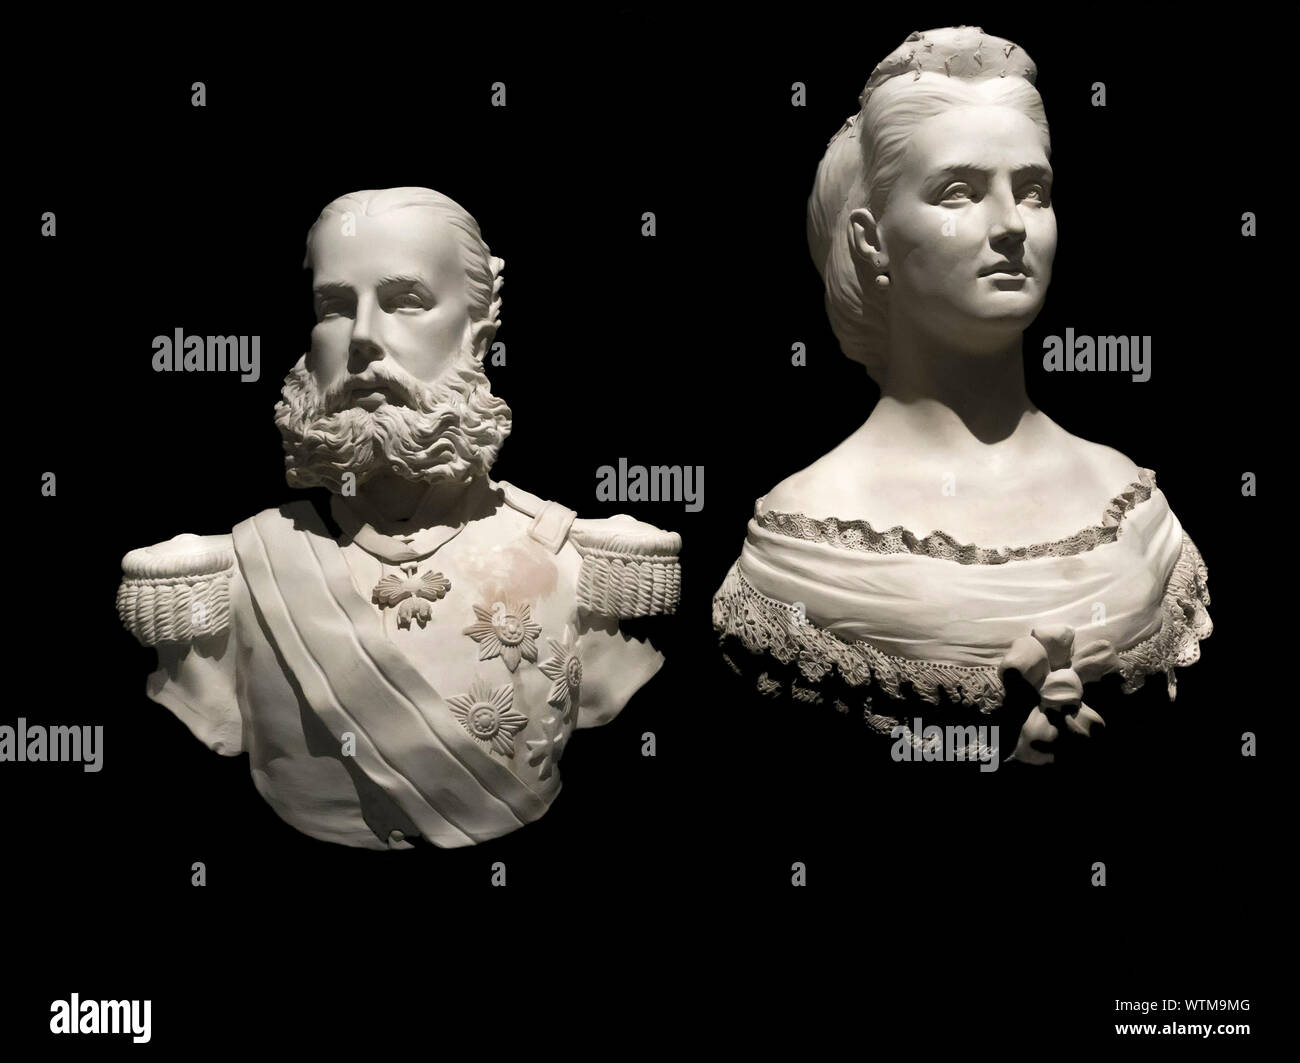 Busts of Emperor Maximilian and his wife Carlota in Chapultepec Castle, Mexico City.  He was an Austrian archduke she a Belgian princess but they were Stock Photo